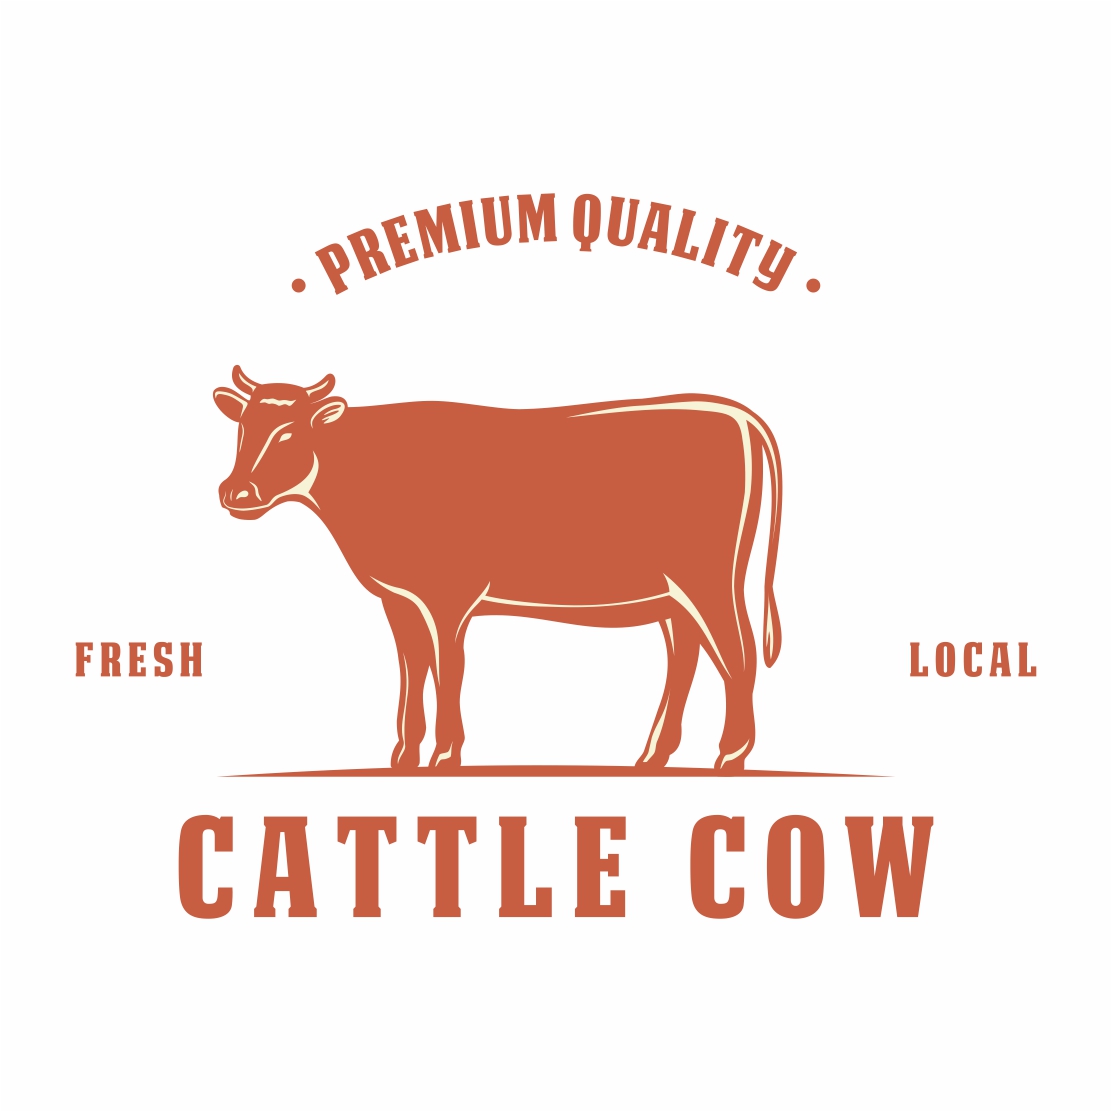 Cattle Farm logo design collection - only 5$ preview image.